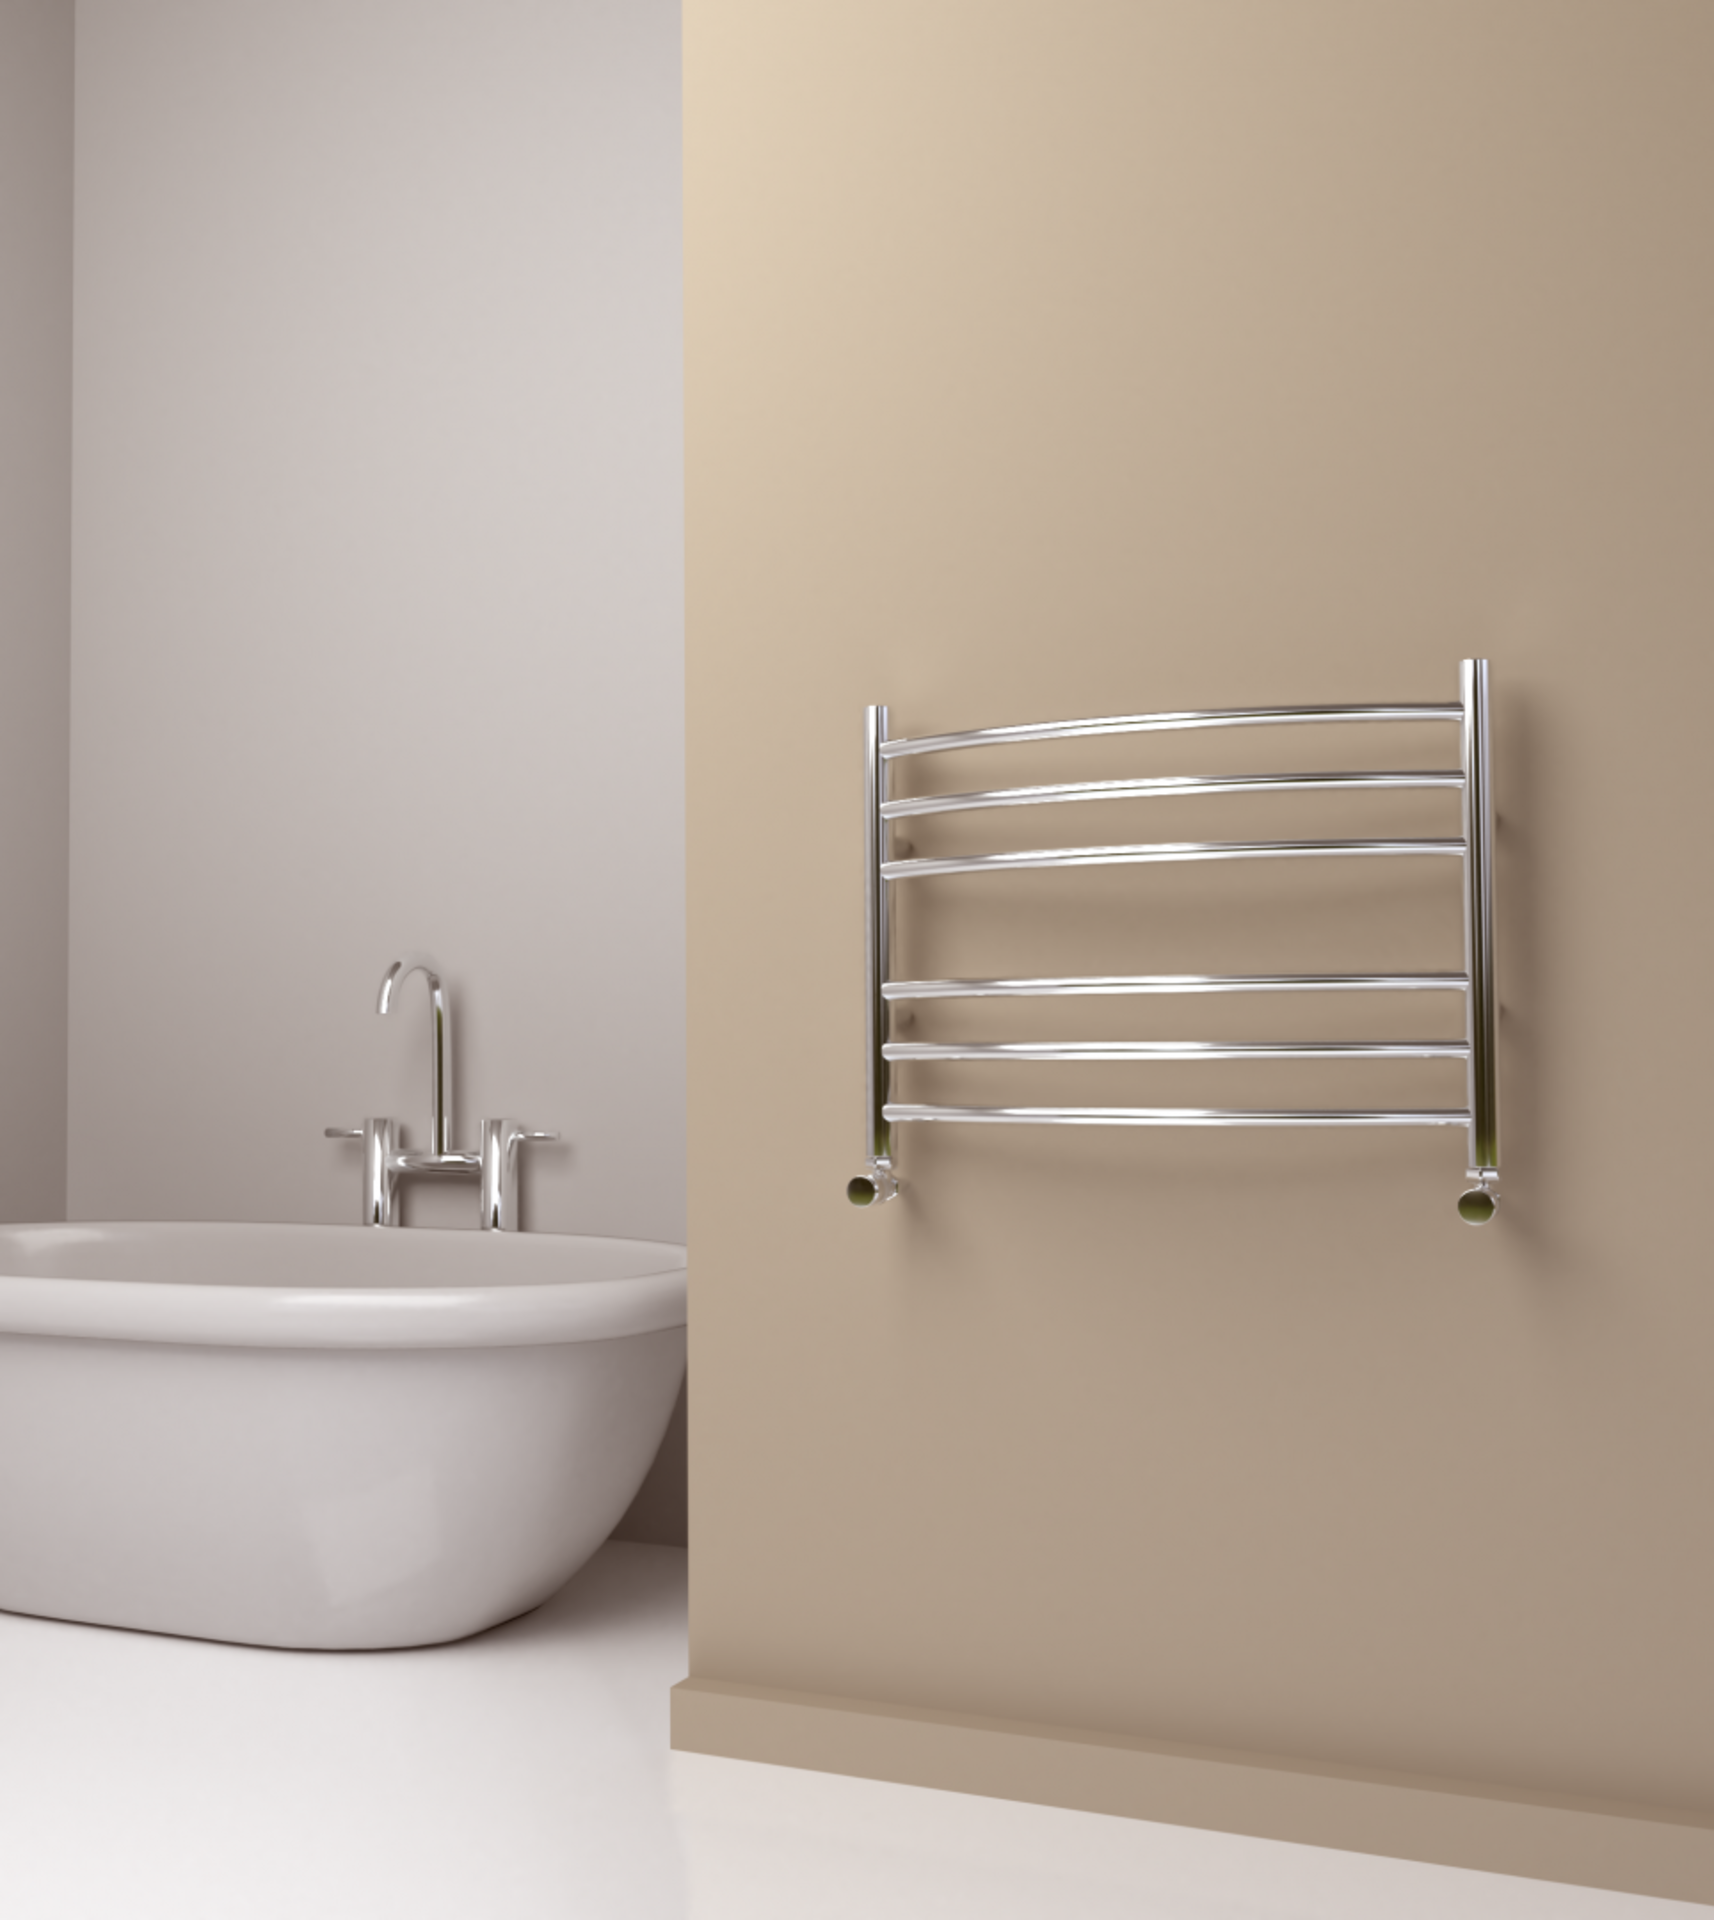 SS302 Baby Curve Radiator by SBH in Latte Finish. H440 x W600mm. RRP £340.70